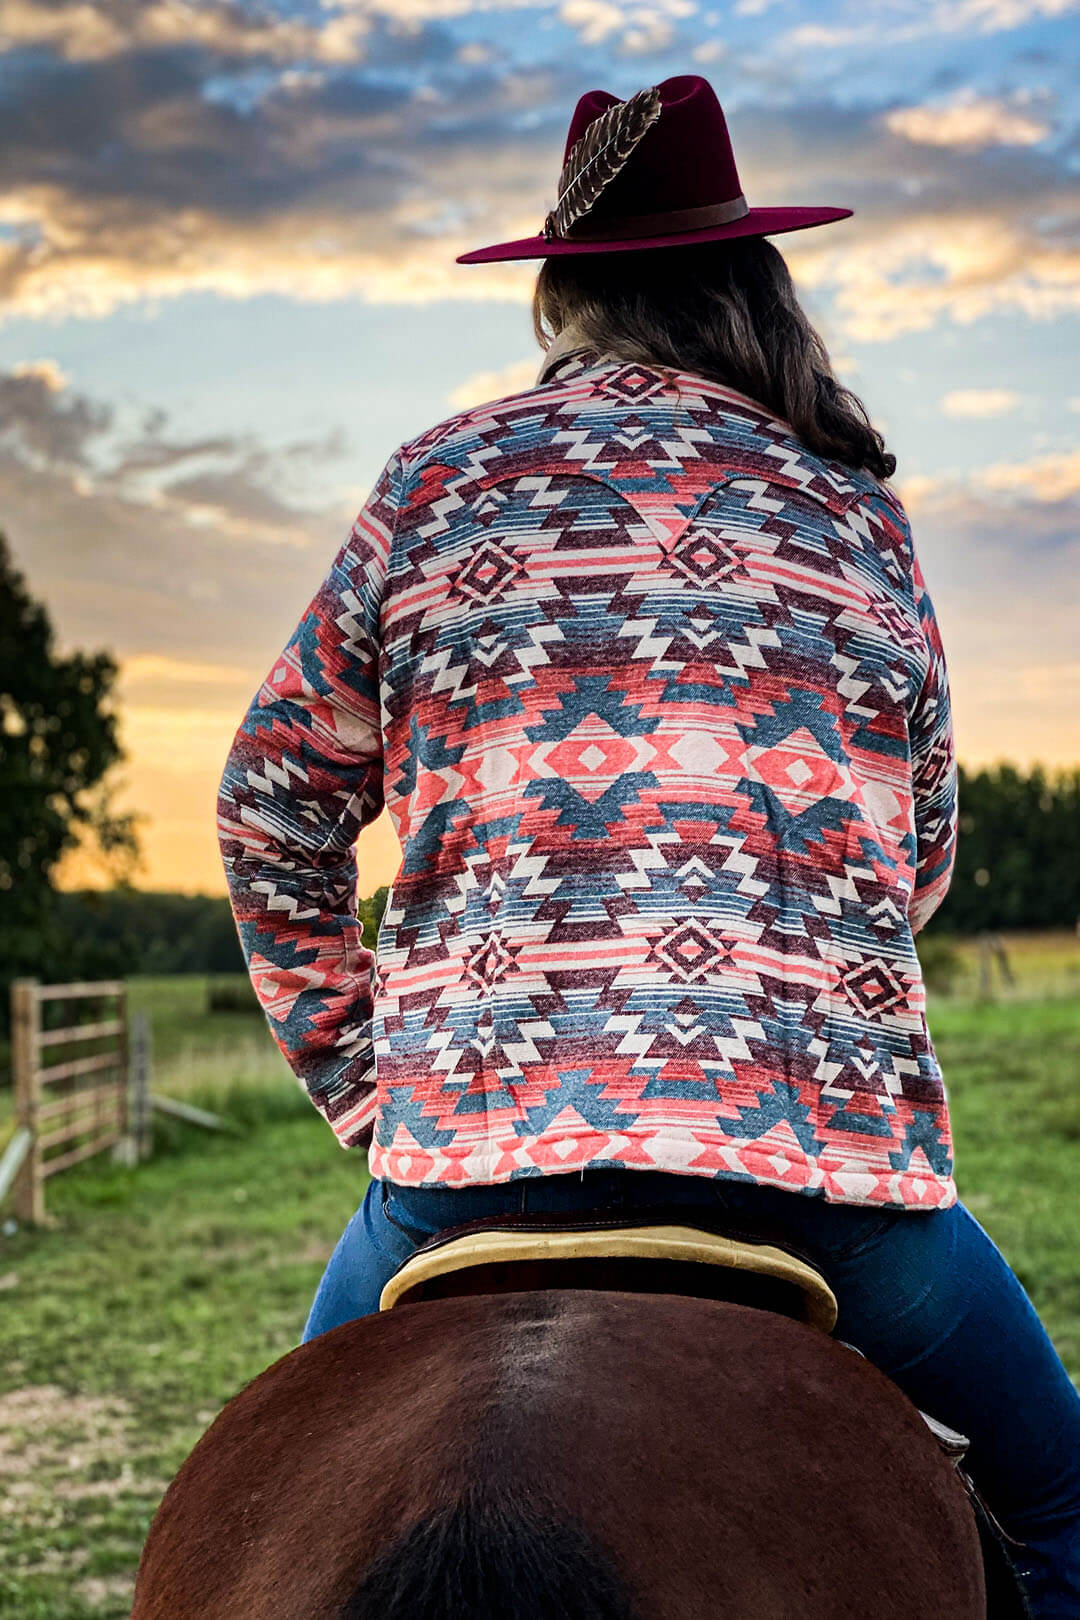 Sherpa insulated jacket southwestern aztec print tones pink, red blue layered throughout entire jacket. Woman on horse wearing burgundy hat with feather stuck in brim